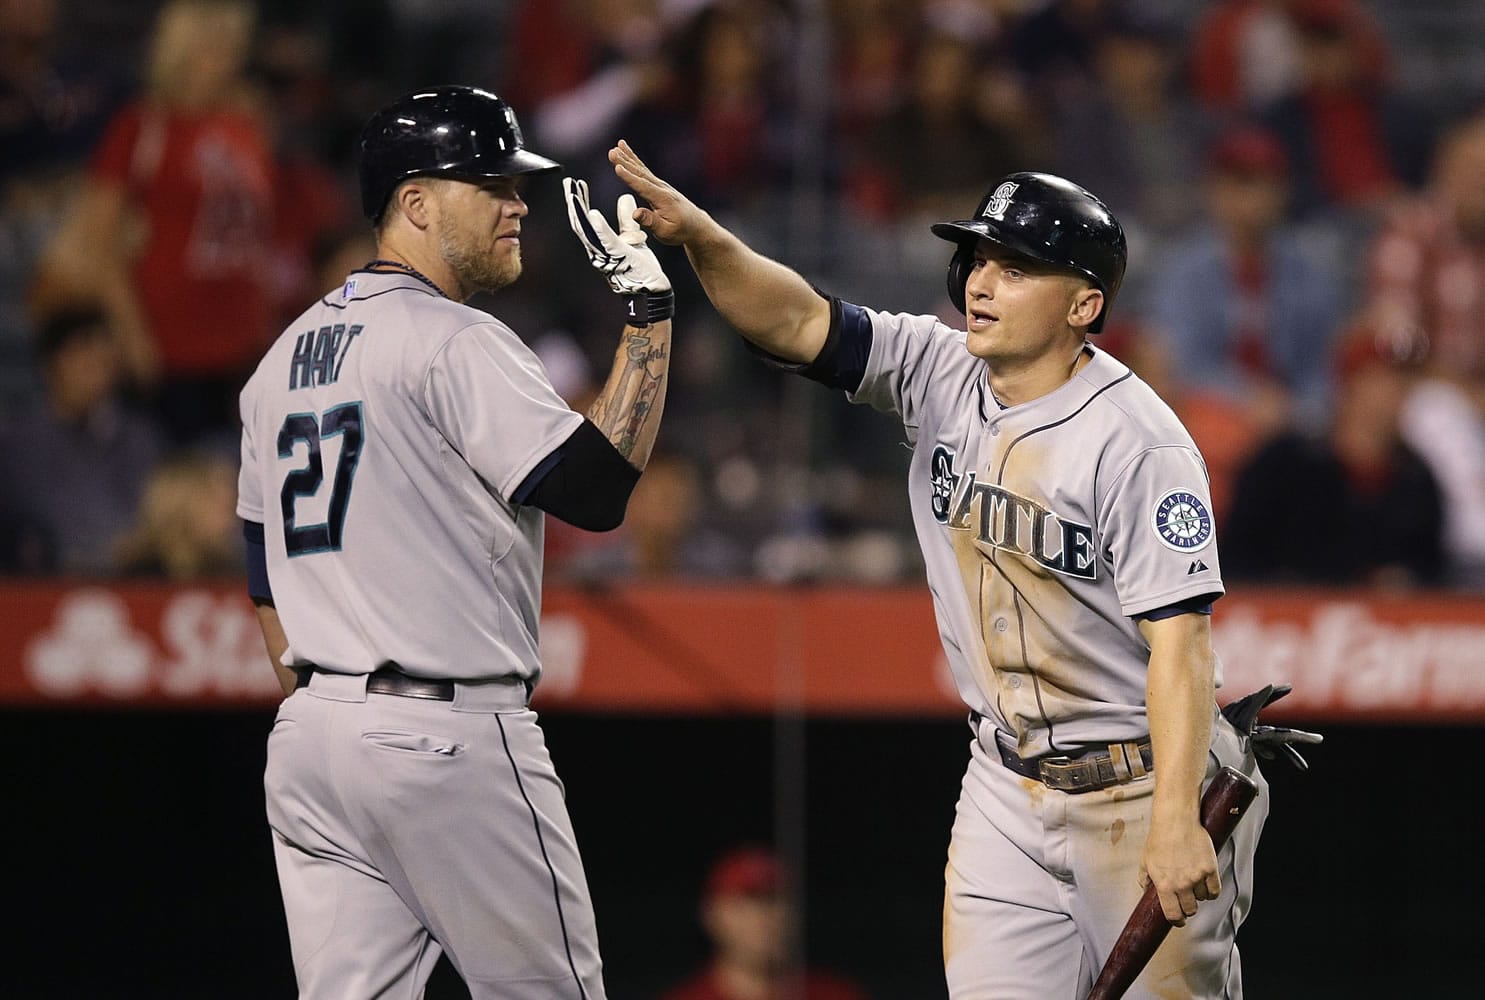 Seattle Mariners' Kyle Seager, right, is greeted by Corey Hart after he scored on a double hit by Logan Morrison during the 12th inning Saturday. (AP Photo/Jae C.